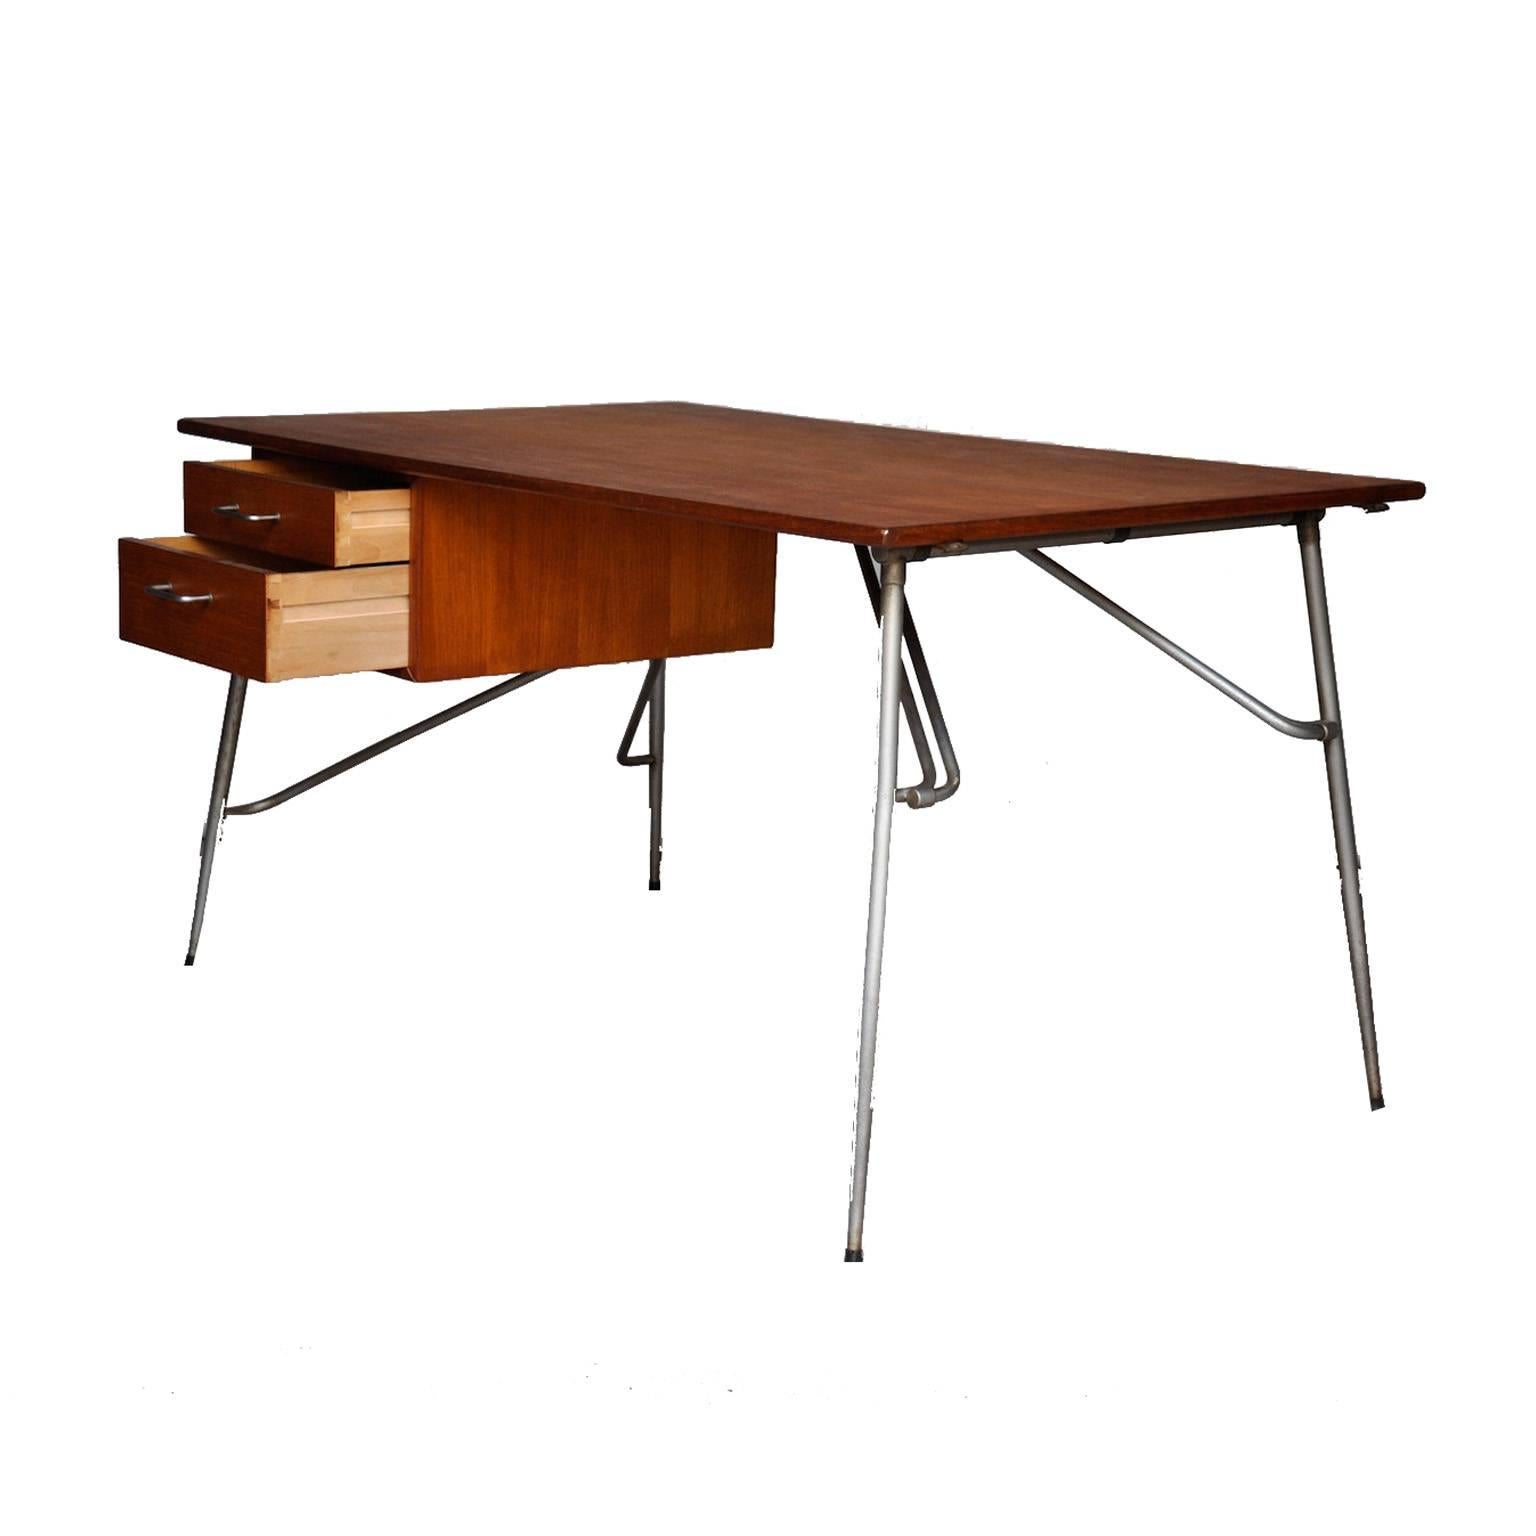 Vintage desk by Børge Mogensen in very good condition. It has a teak top and metal legs.

Unfortunately the drop leaf is missing. The iron 